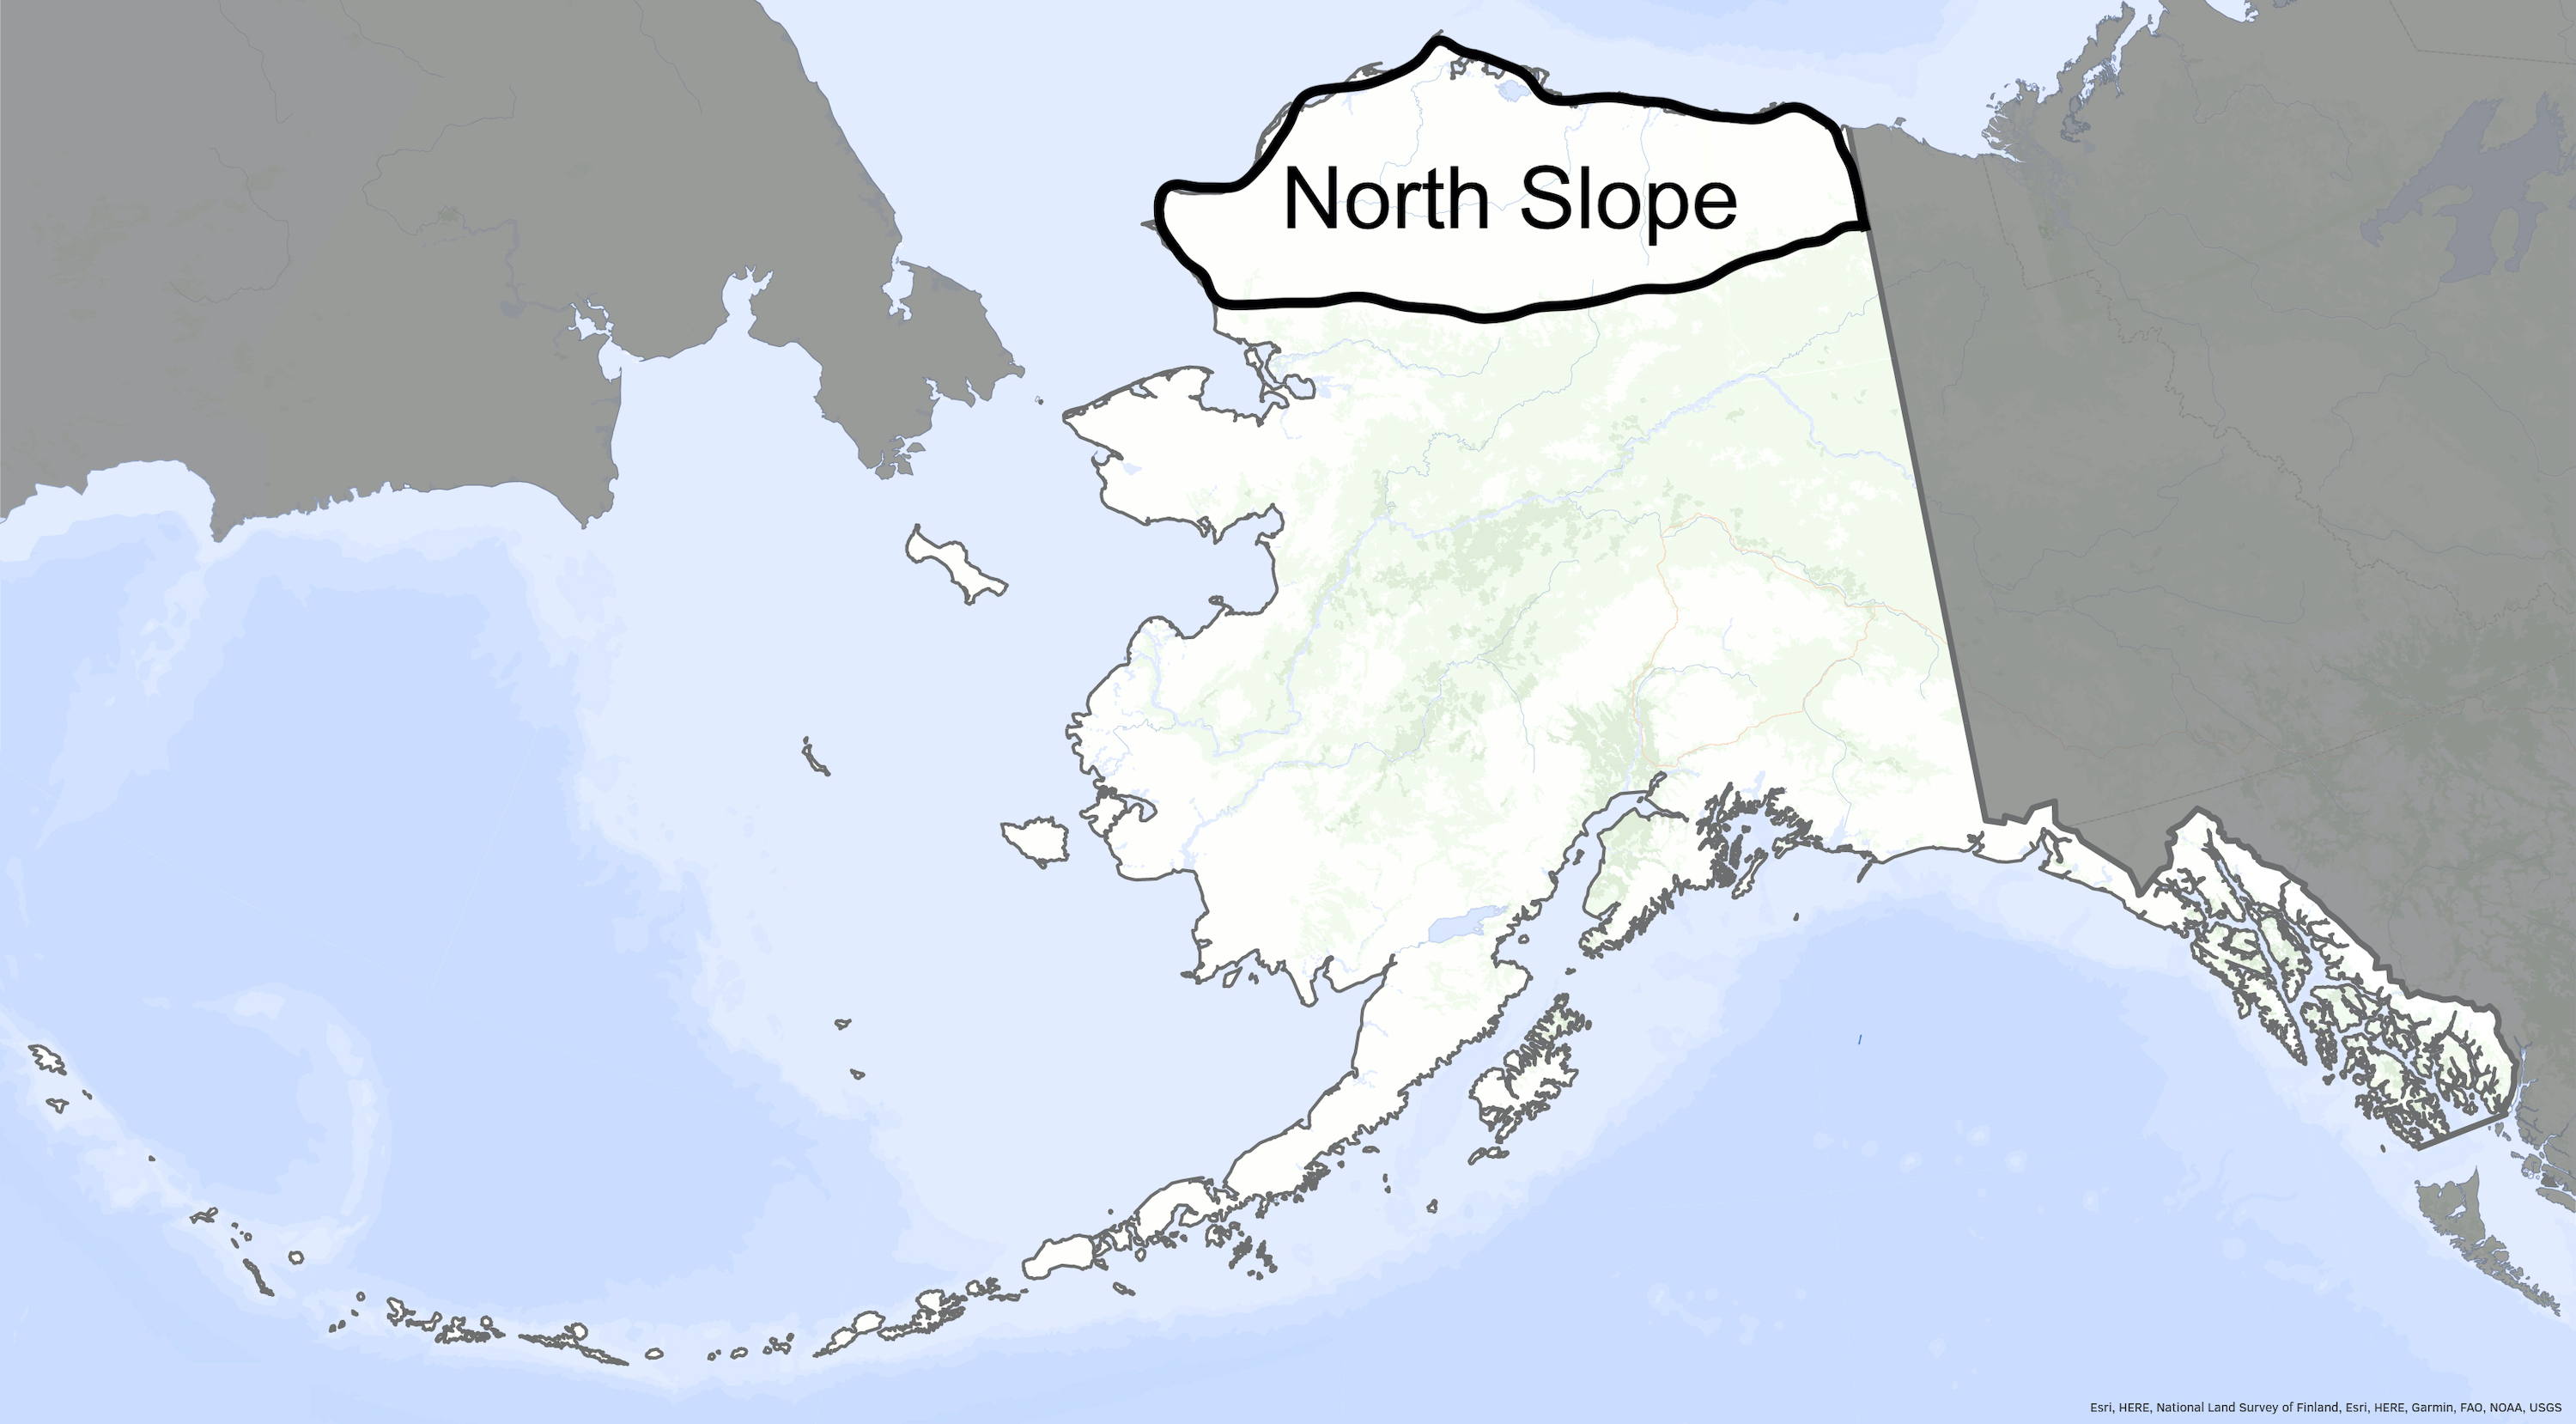 The North Slope is circled on a map of Alaska.